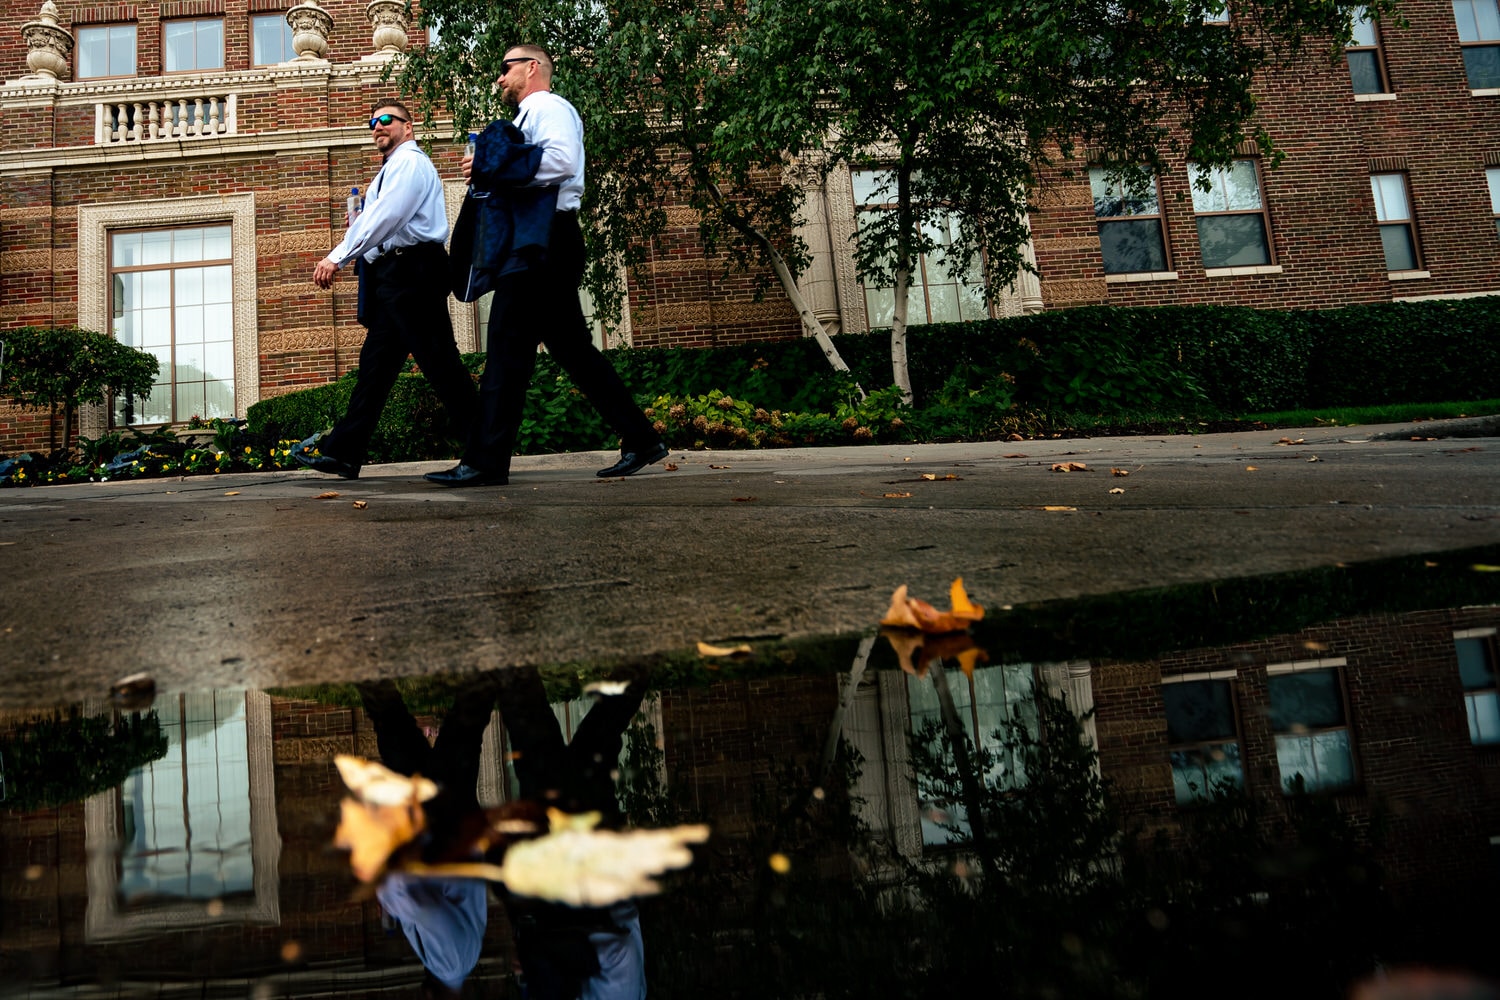 A candid picture of two grooms in tuxedos walking on a sidewalk, their reflections visible in a puddle in front of them. 